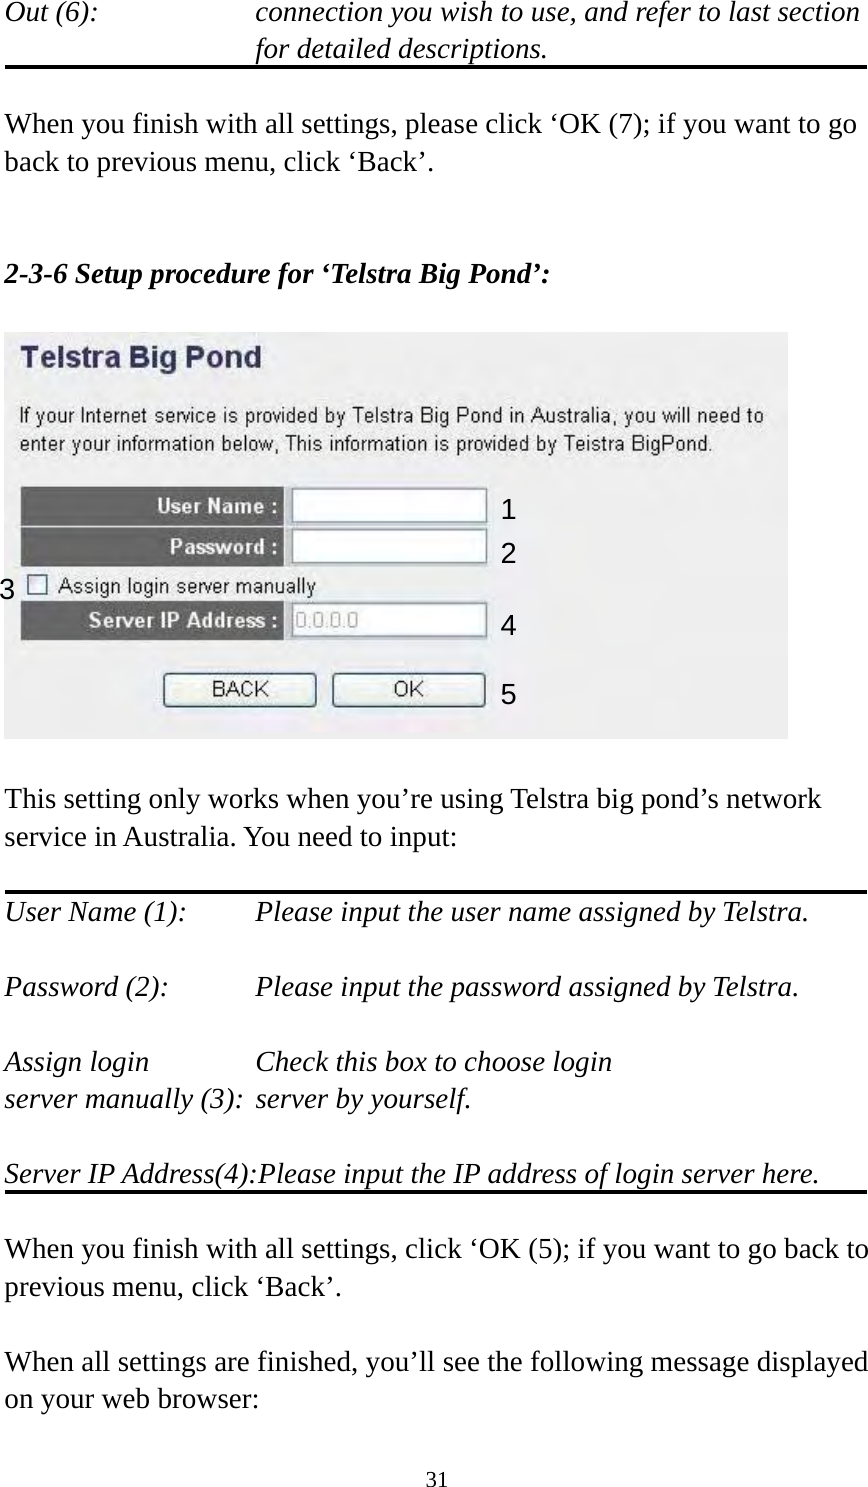 31 Out (6):    connection you wish to use, and refer to last section for detailed descriptions.  When you finish with all settings, please click ‘OK (7); if you want to go back to previous menu, click ‘Back’.   2-3-6 Setup procedure for ‘Telstra Big Pond’:    This setting only works when you’re using Telstra big pond’s network service in Australia. You need to input:  User Name (1):     Please input the user name assigned by Telstra.  Password (2):      Please input the password assigned by Telstra.  Assign login          Check this box to choose login server manually (3): server by yourself.  Server IP Address(4):Please input the IP address of login server here.  When you finish with all settings, click ‘OK (5); if you want to go back to previous menu, click ‘Back’.  When all settings are finished, you’ll see the following message displayed on your web browser: 123 4 5 